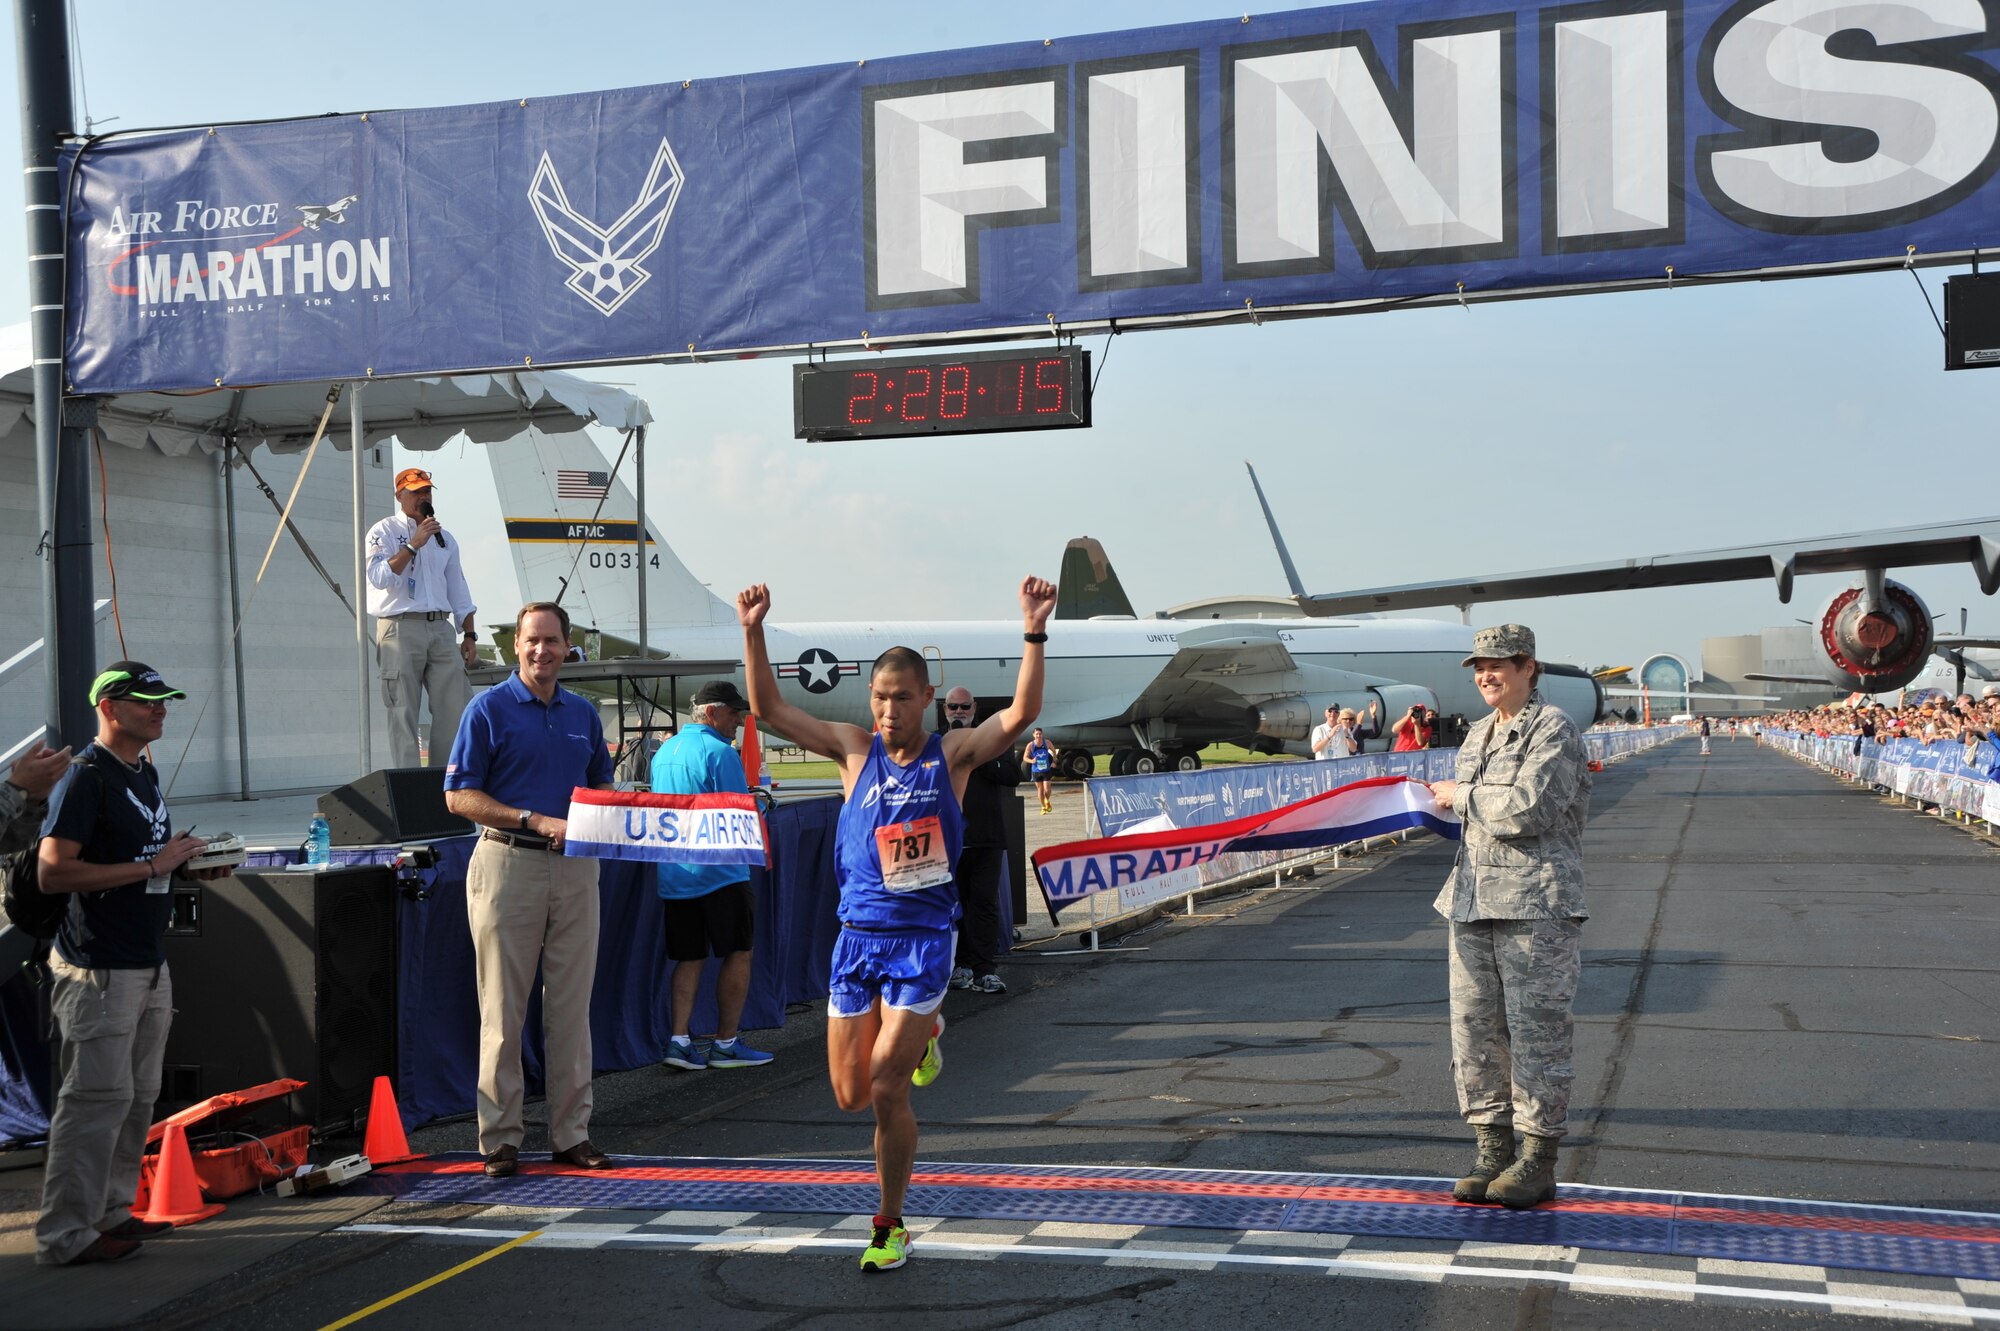 Steve Chu crosses the finish line and is the winner of the 2014 U.S. Air Force Marathon Sept. 20, 2014, at Wright-Patterson Air Force Base, Ohio. Chu is from Colorado Springs, Colorado. (U.S. Air Force photo/Mike Libecap)